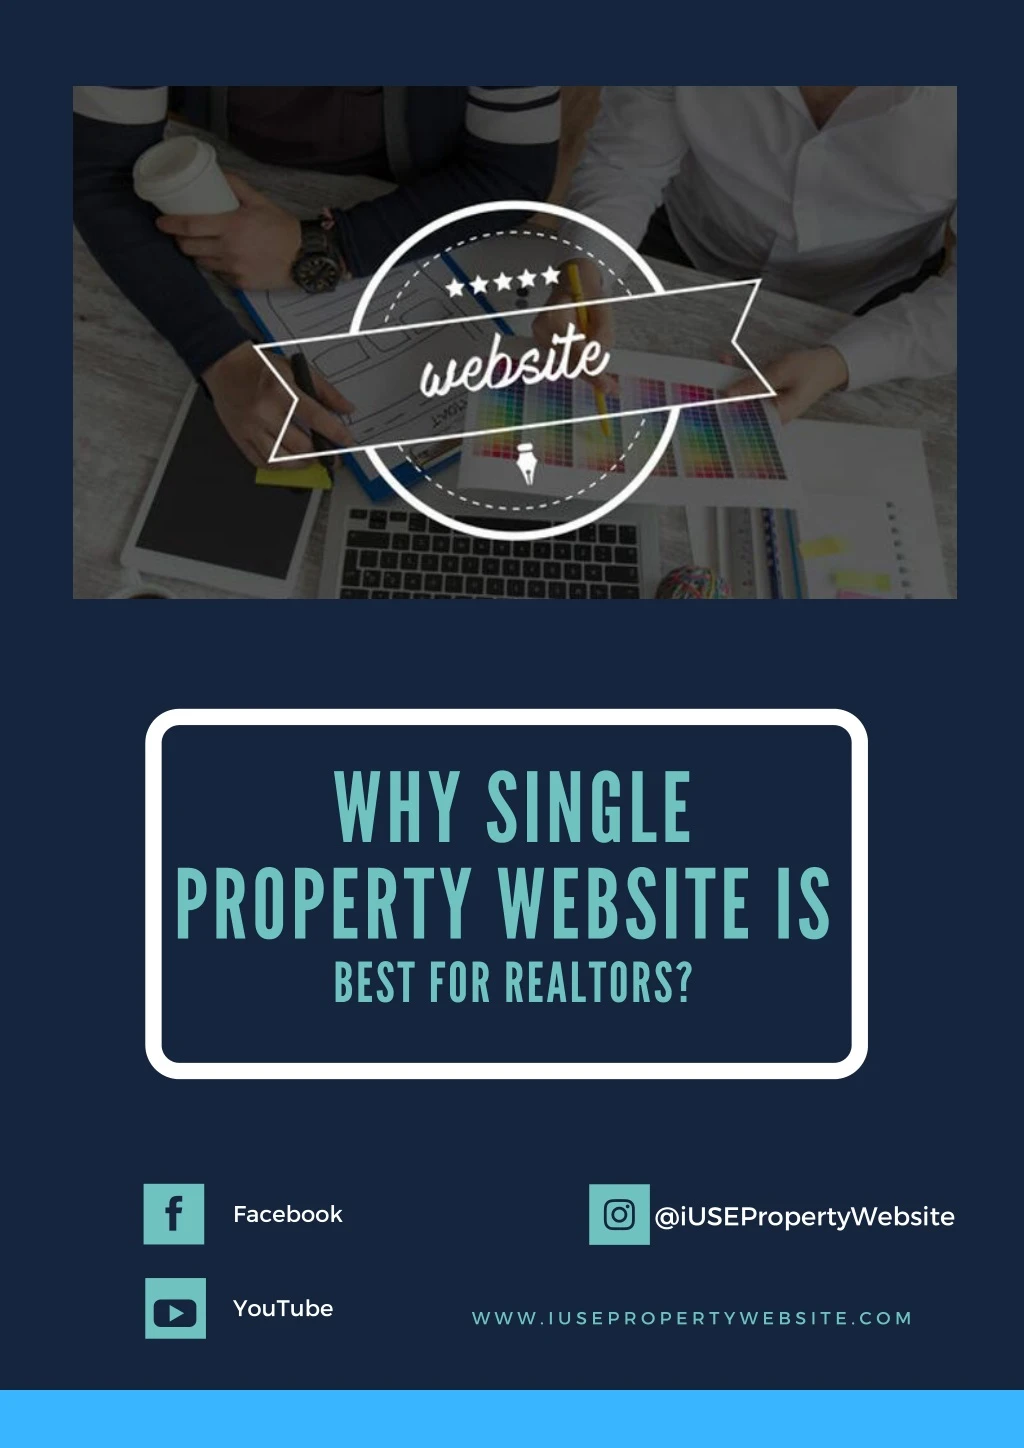 why single property website is best for re a ltors